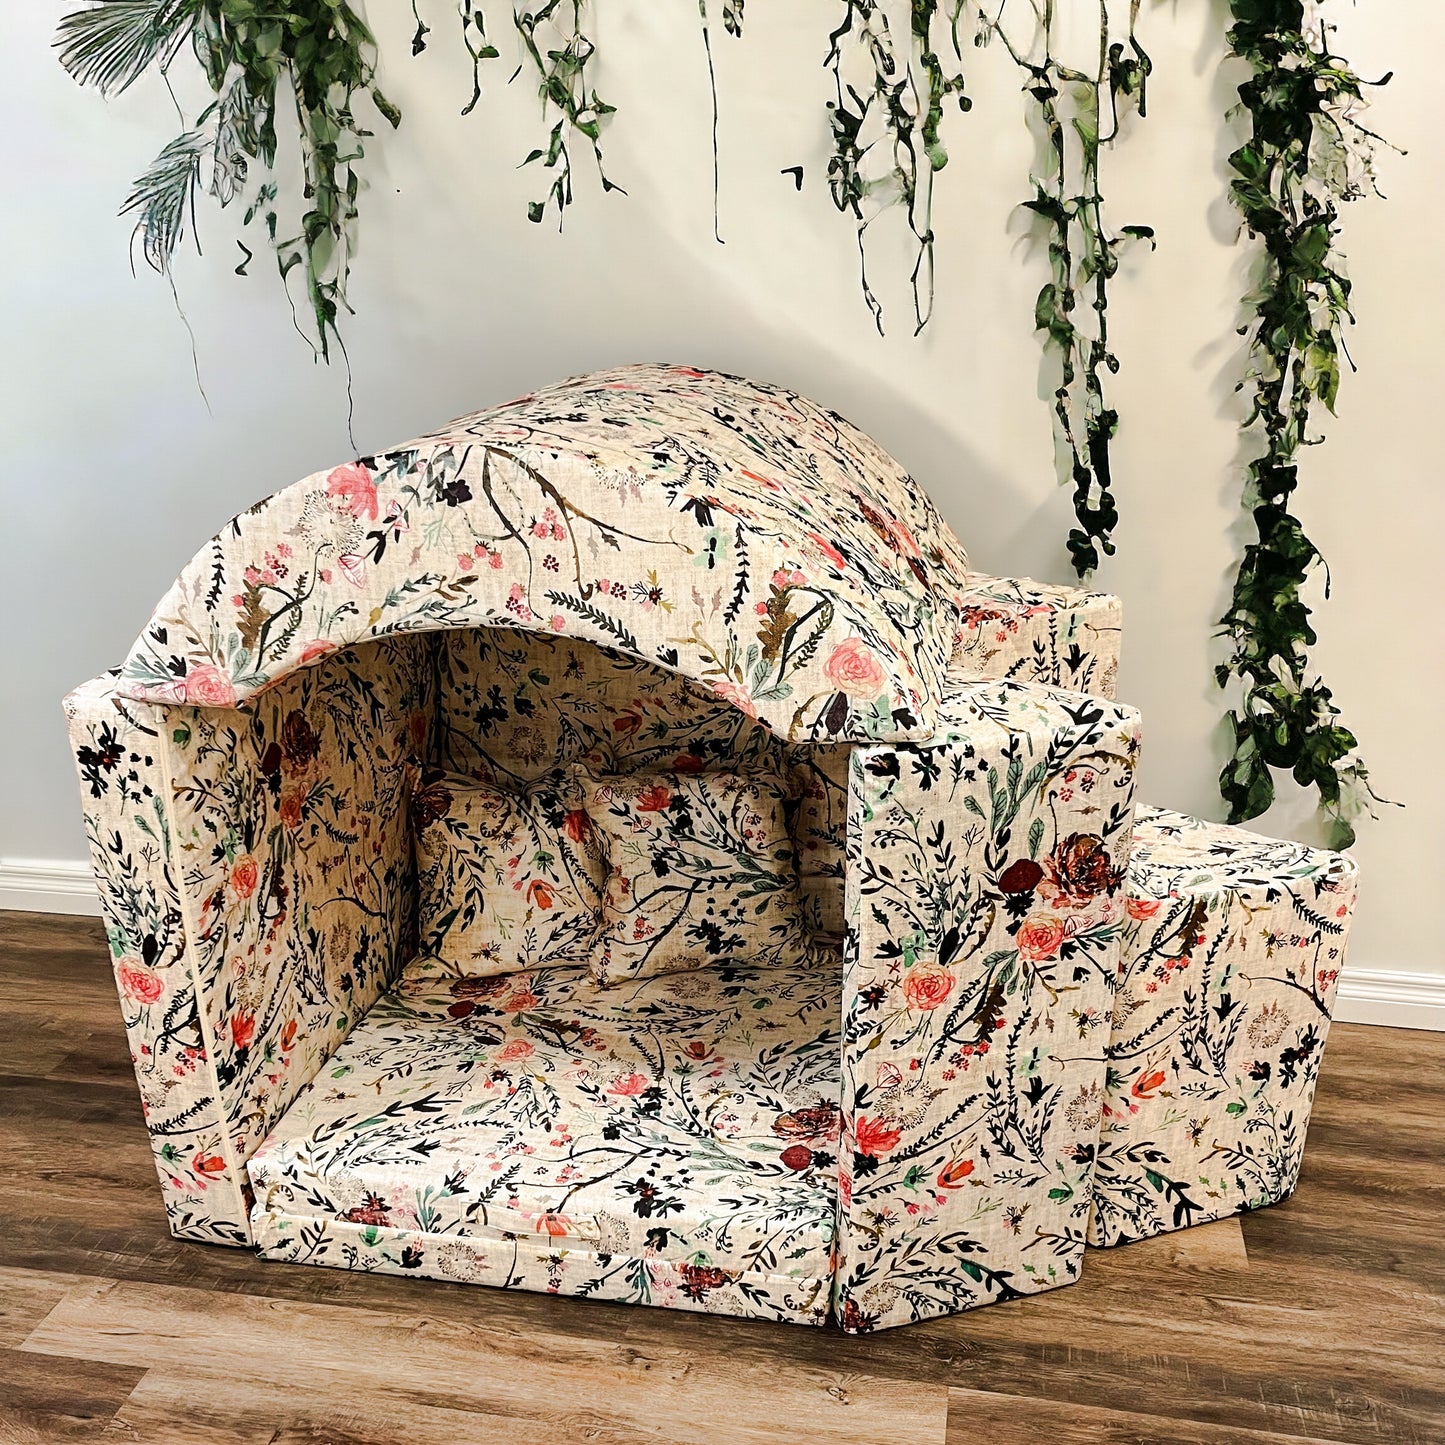 Playcouch Covers - Fable Floral